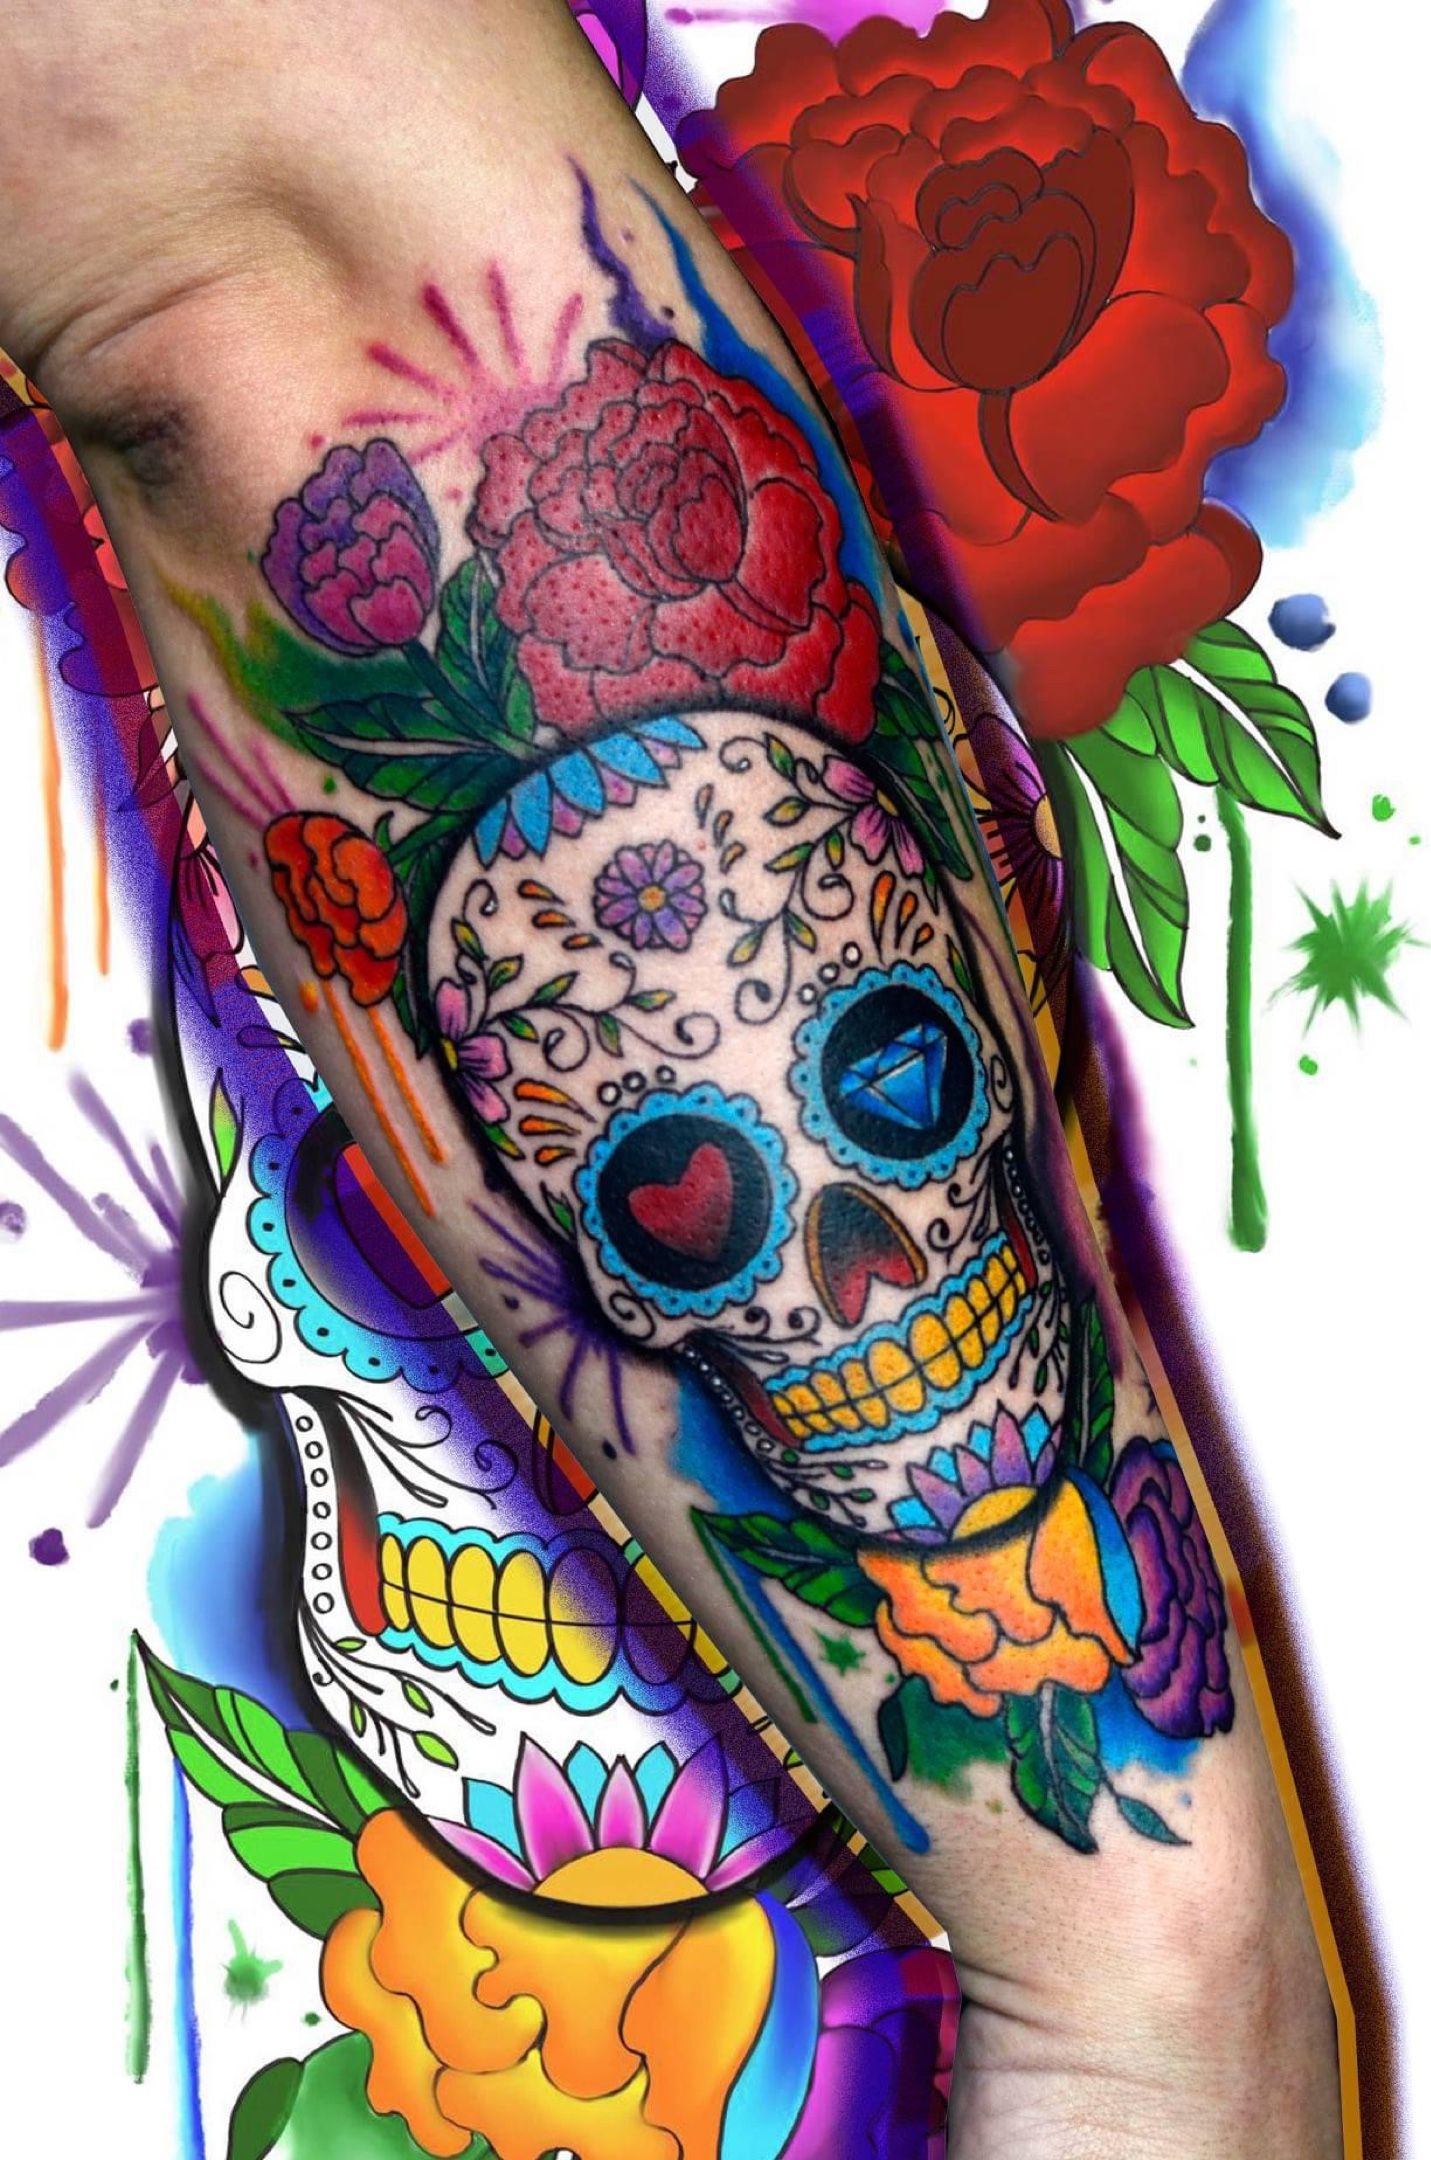 99 Skull Tattoos For Thighs To Give Illustrative looks At Once